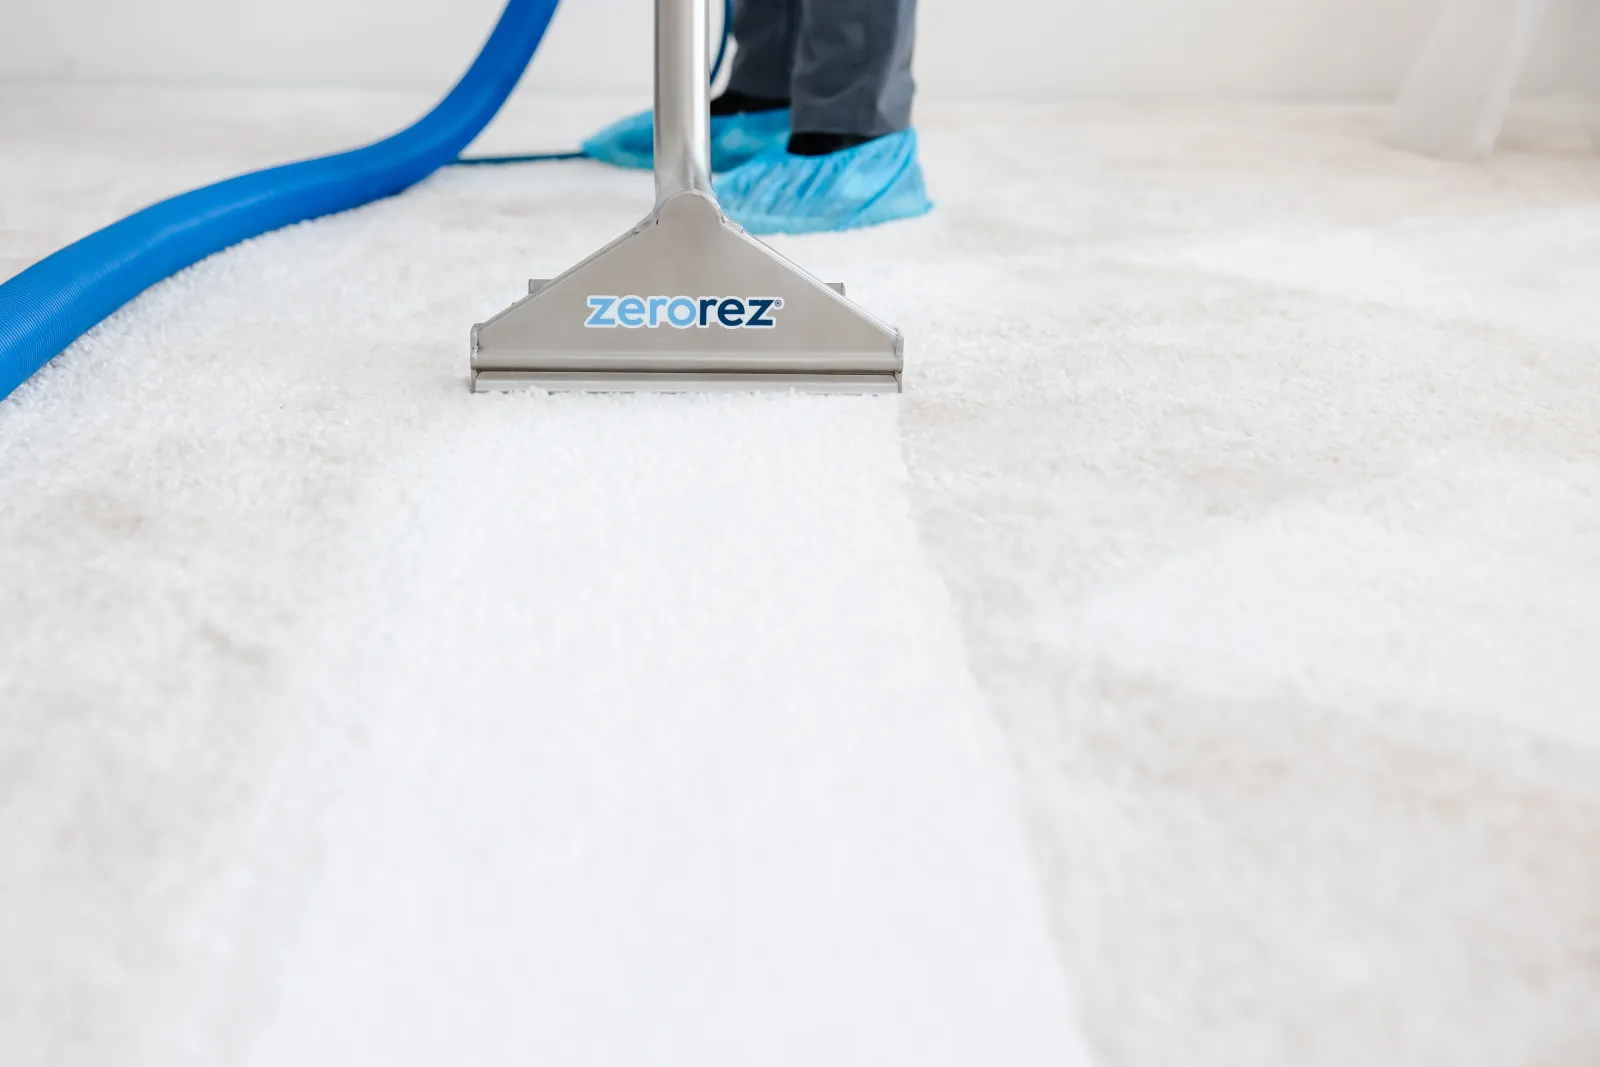 Zerorez Zr™ Wand extracting dirt and grime from a white carpet, leaving no sticky residue behind after cleaning